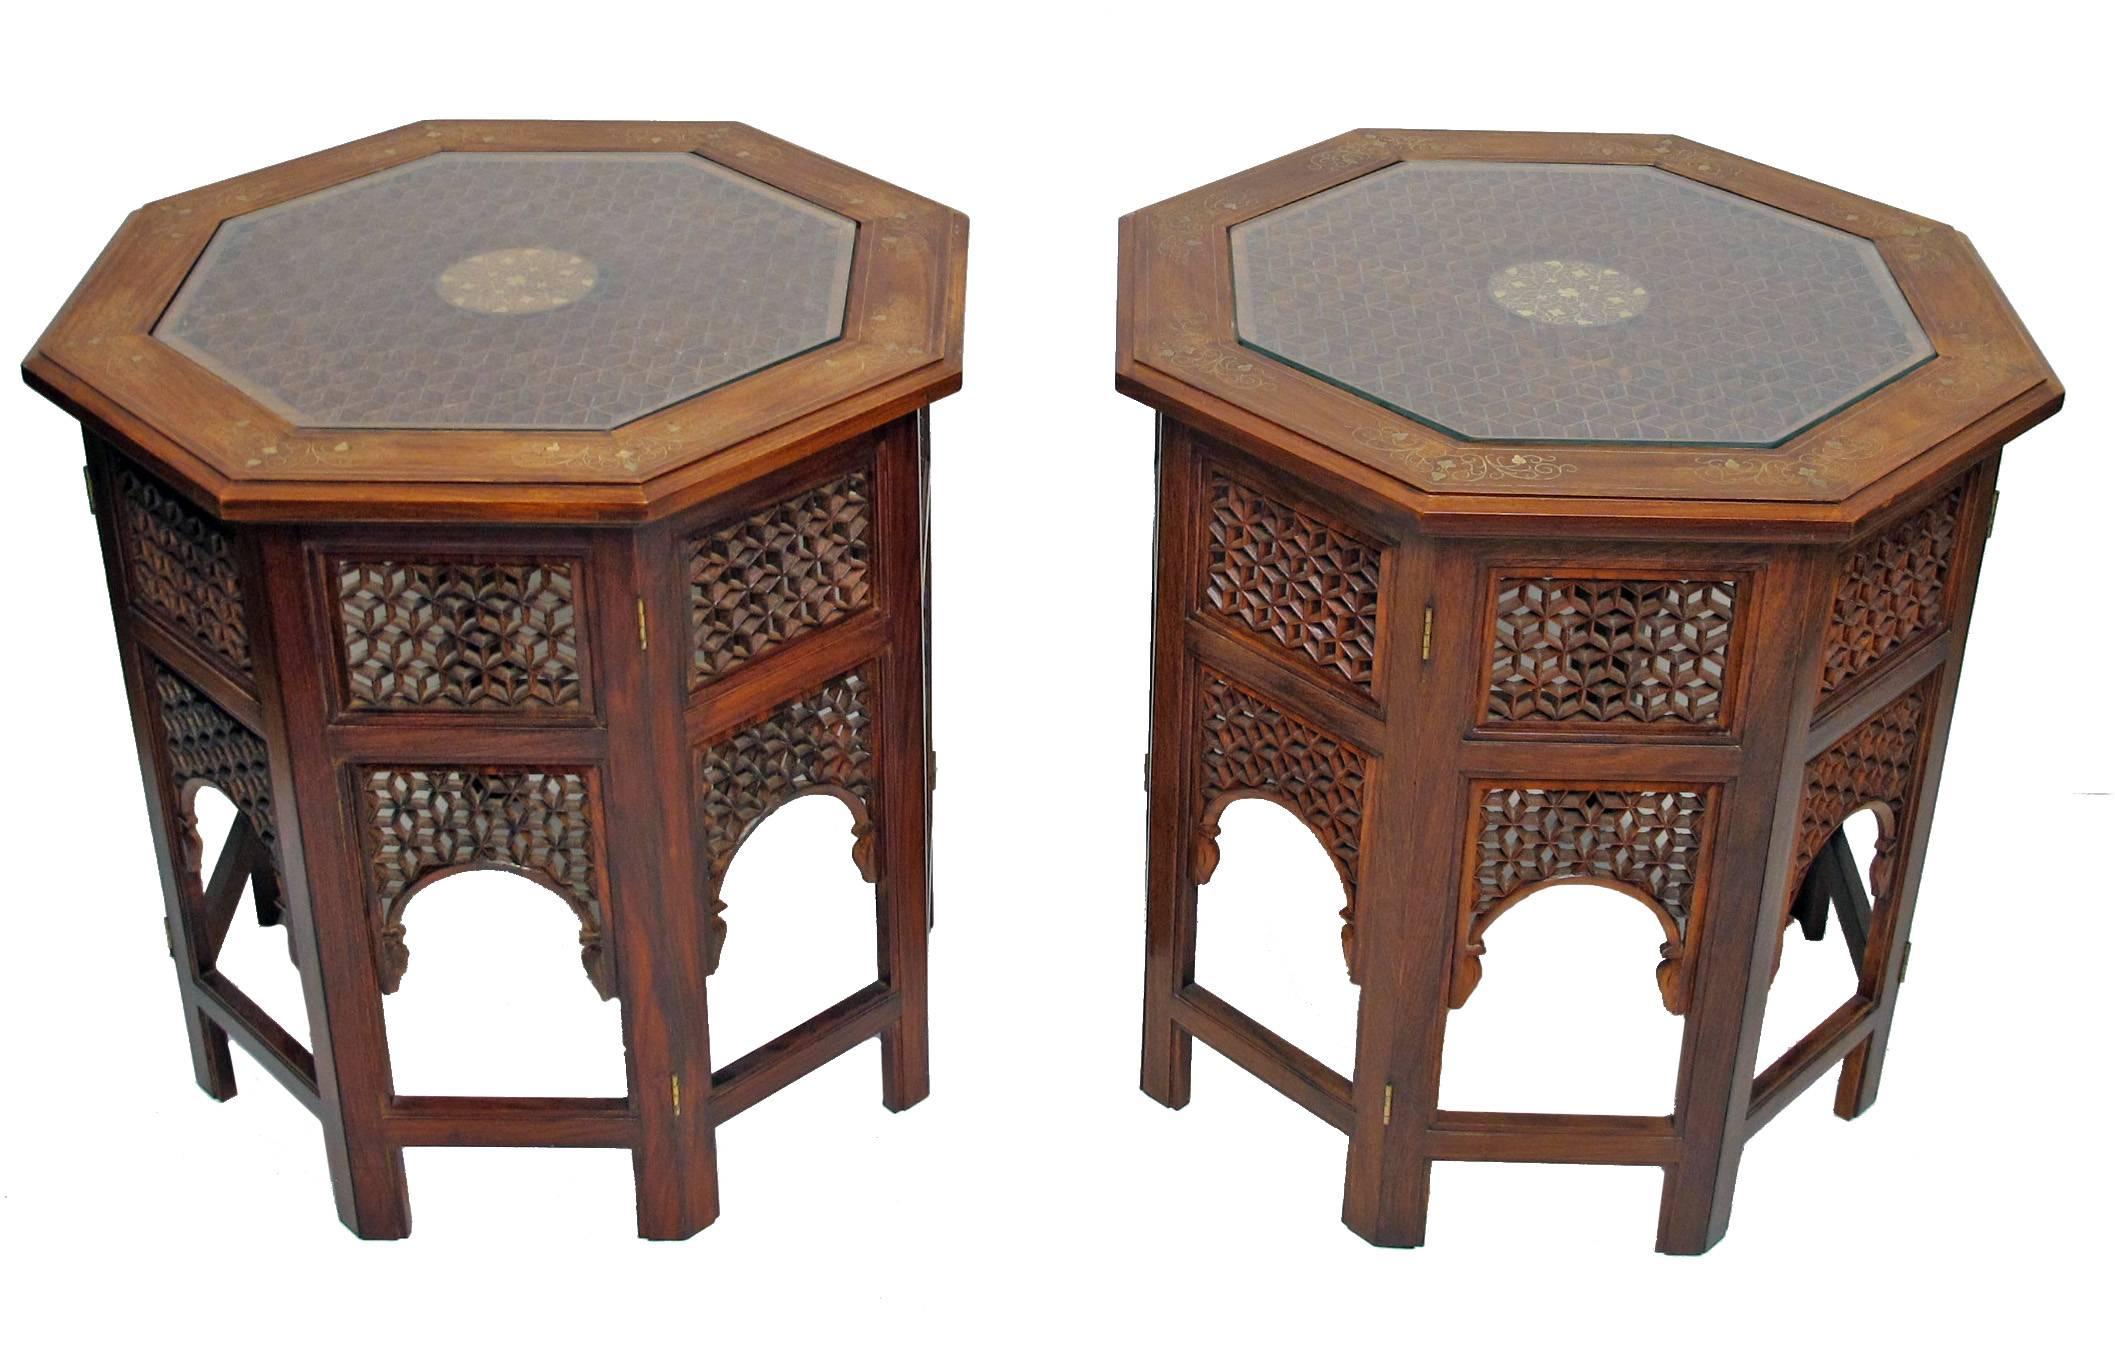 Pair of Octagonal Brass Inlaid Tabouret Side Tables 2